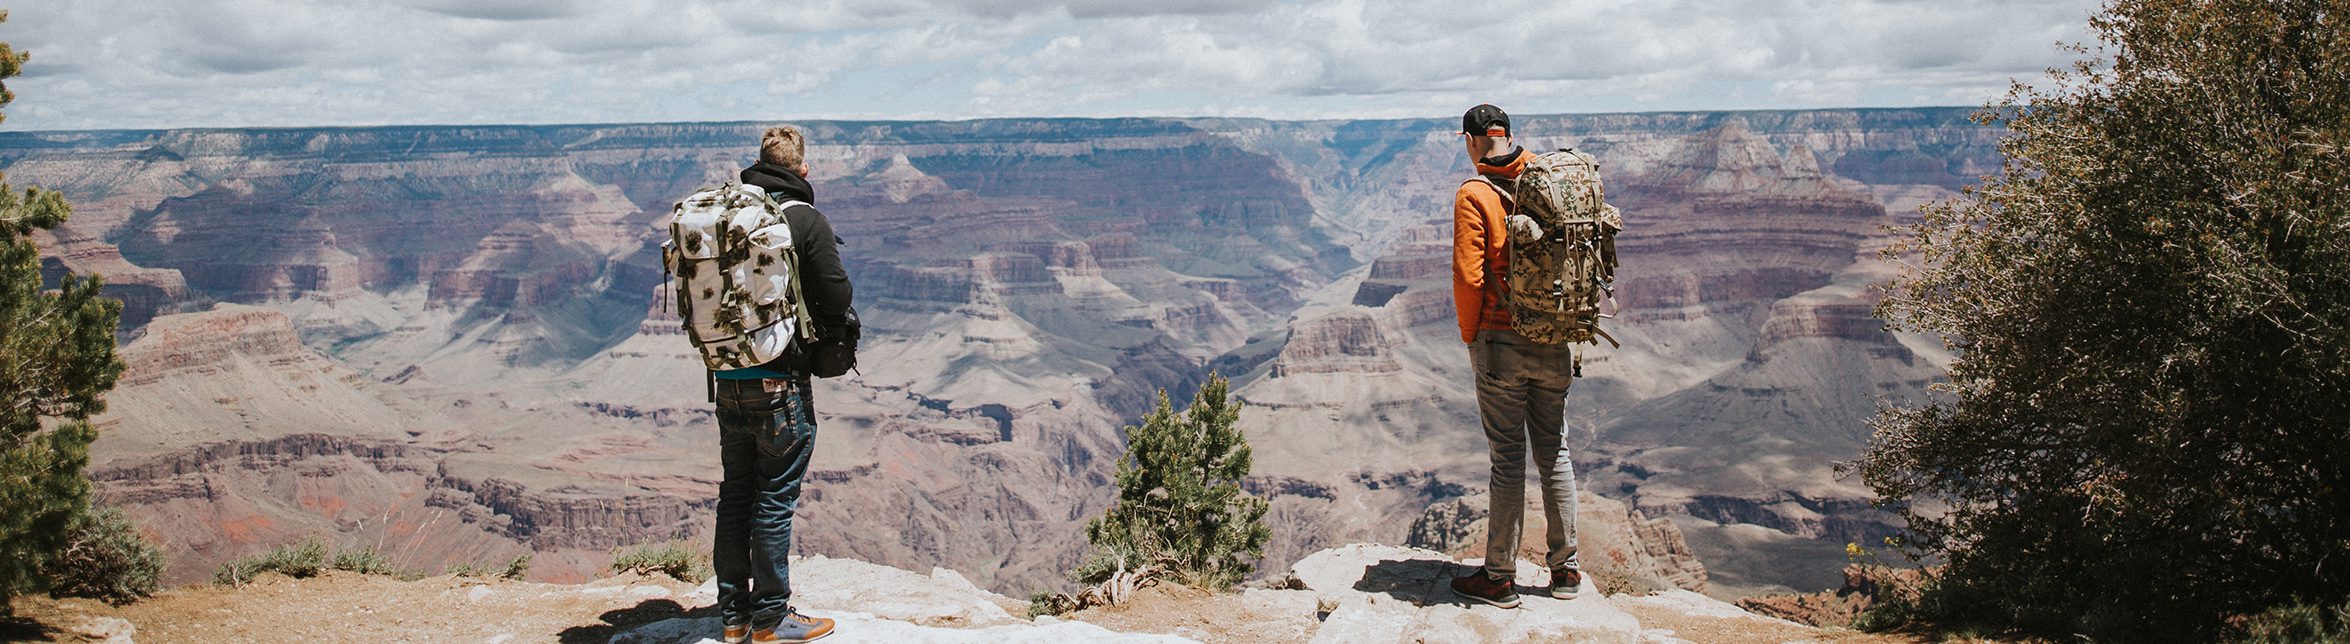 Two backpackers overlooking the Grand Canyon on an adventure tour.